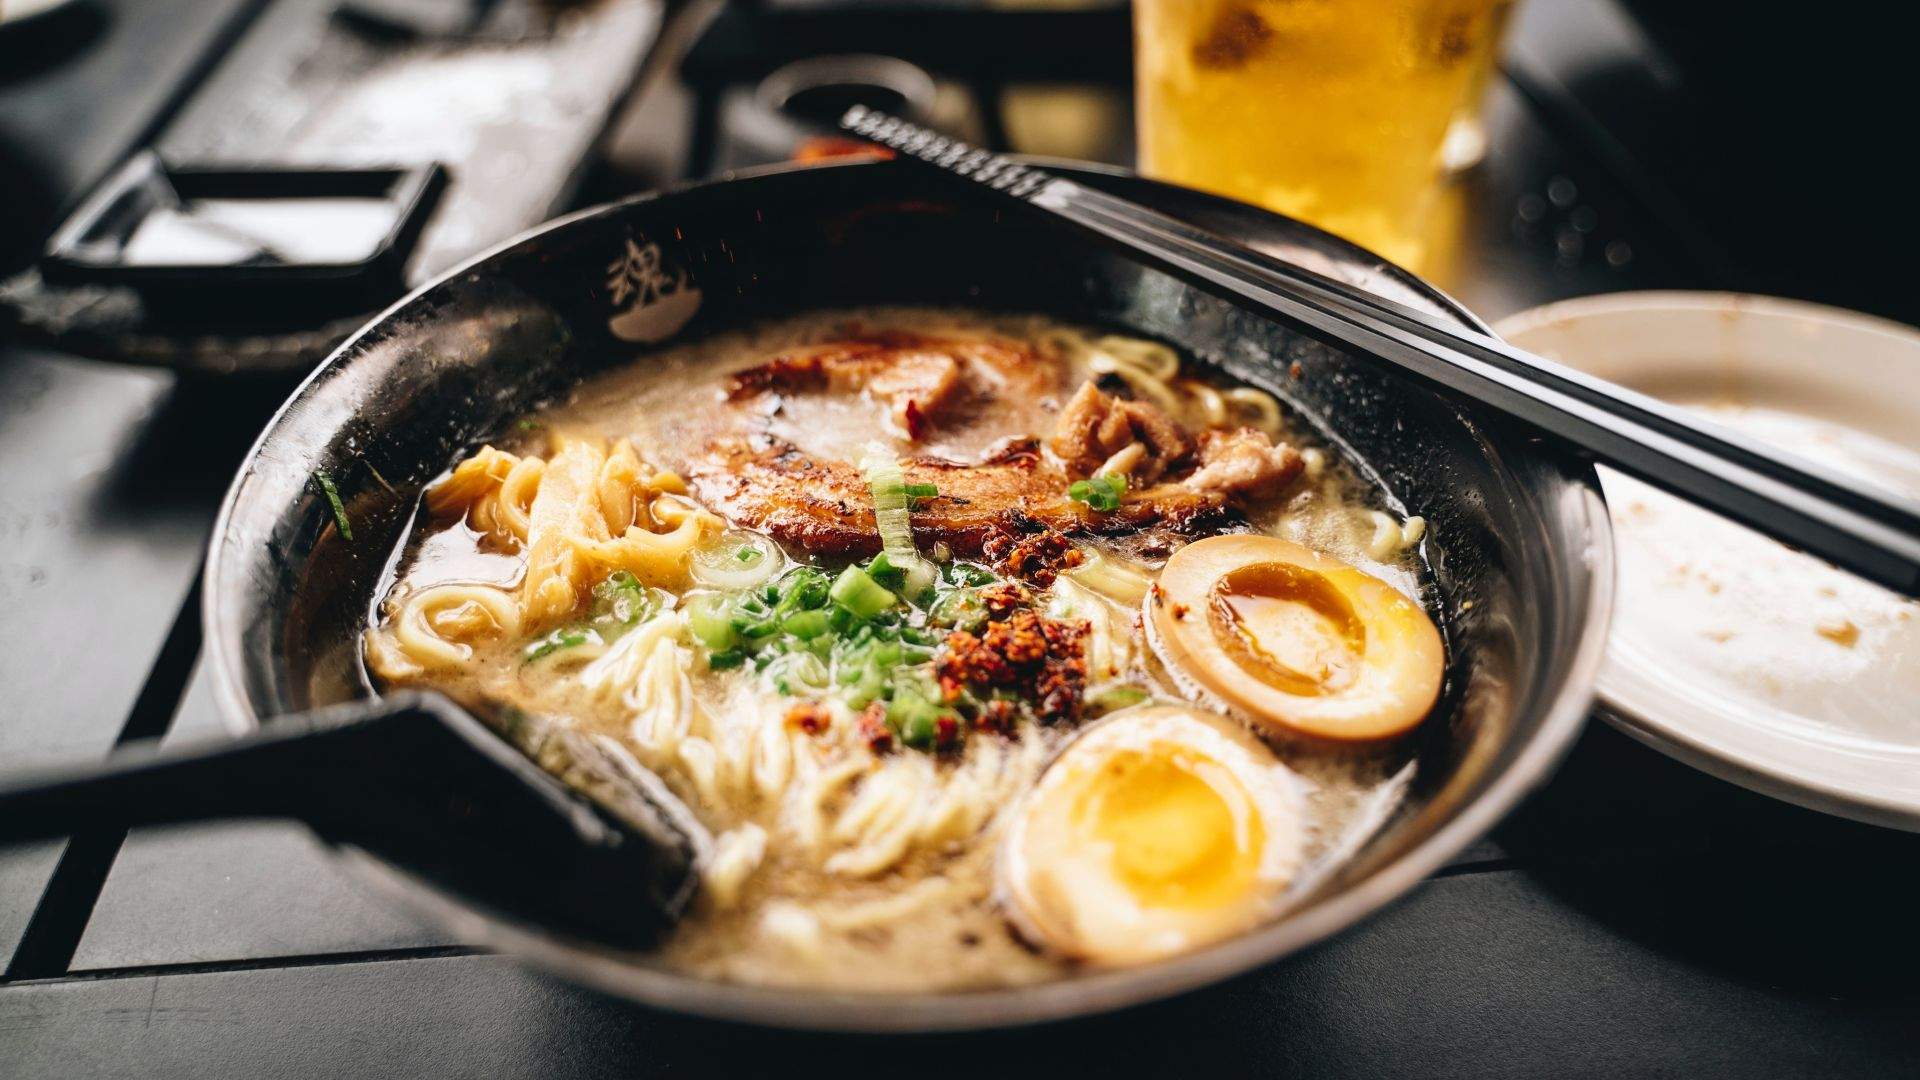 The Best Ramen Spots Around Auckland for When You Need to Warm Your Bones